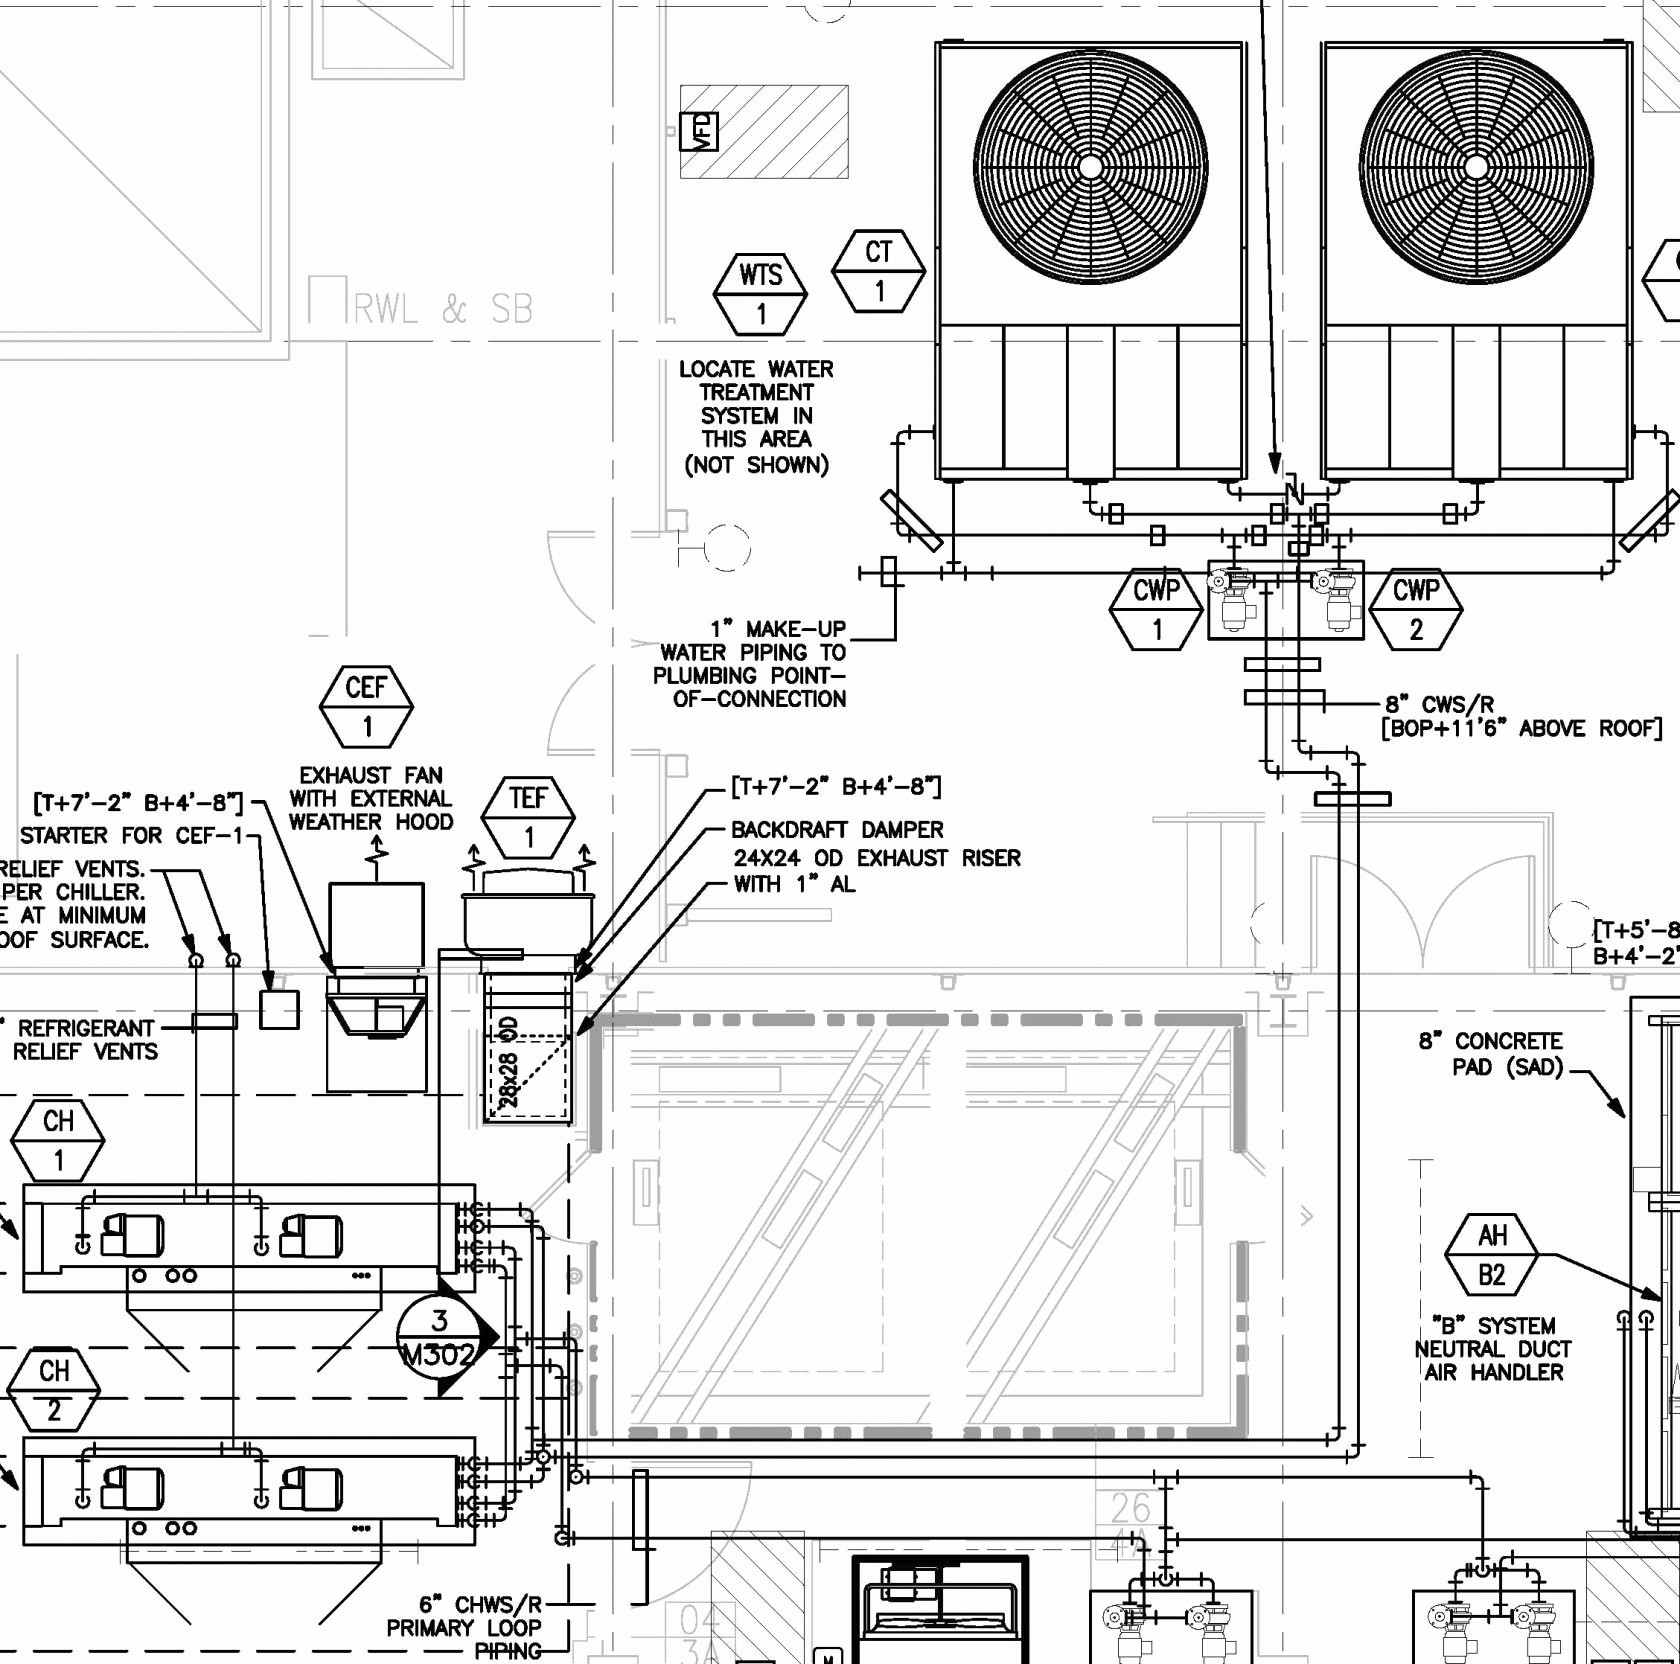 Wiring Diagram for Electrical Control Panel New Swimming Pool Timer Wiring Diagram